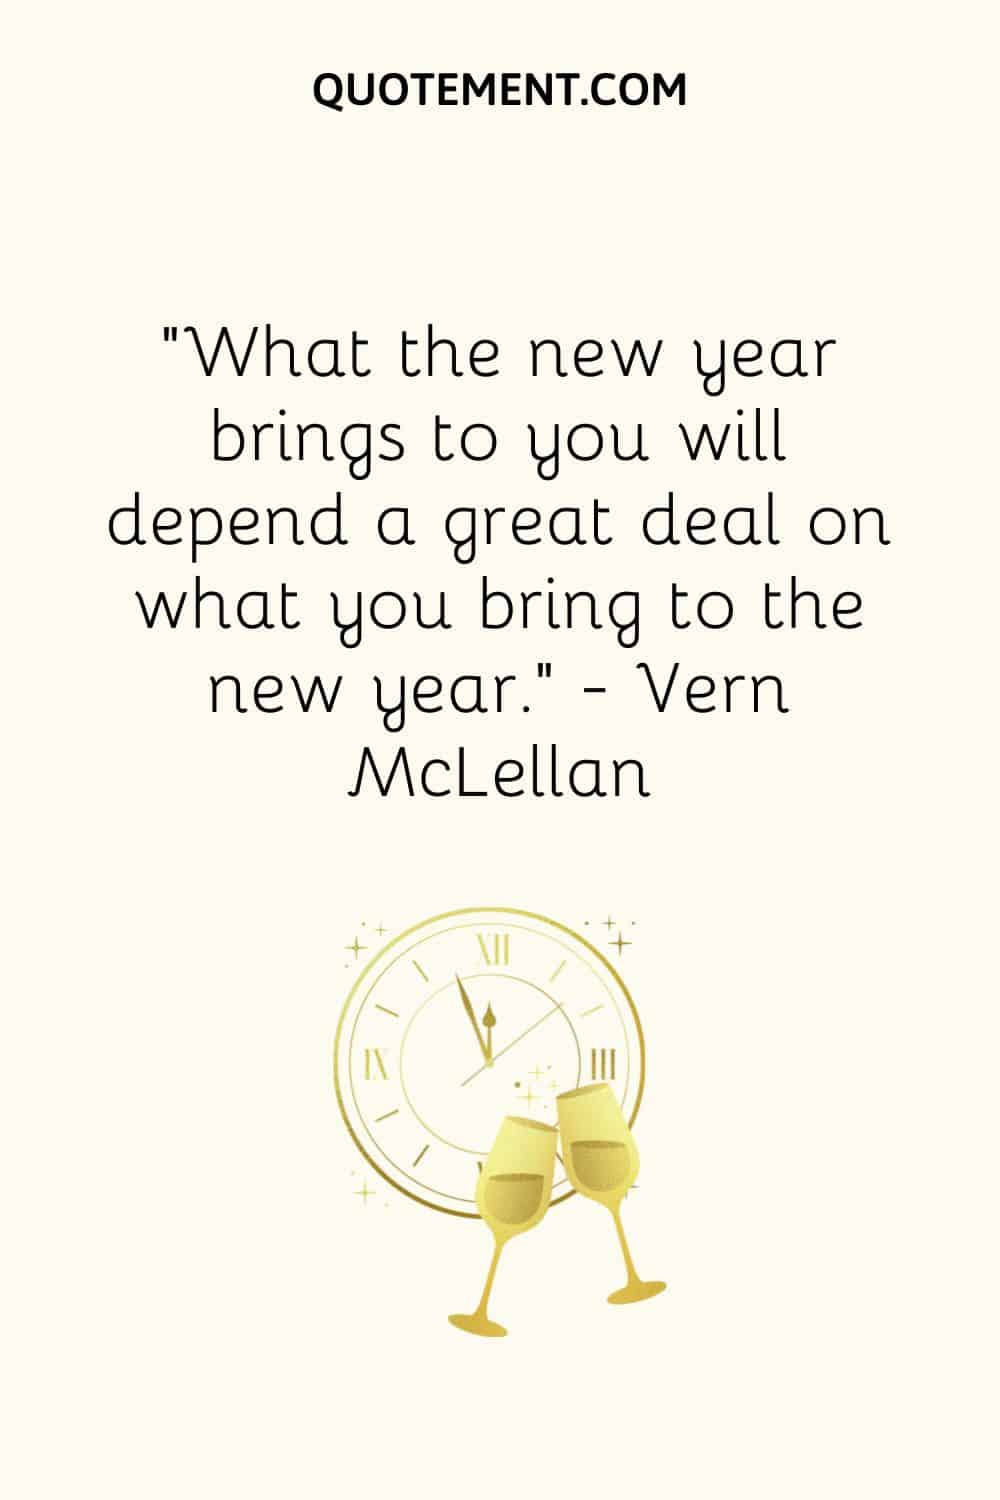 “What the new year brings to you will depend a great deal on what you bring to the new year.” ― Vern McLellan